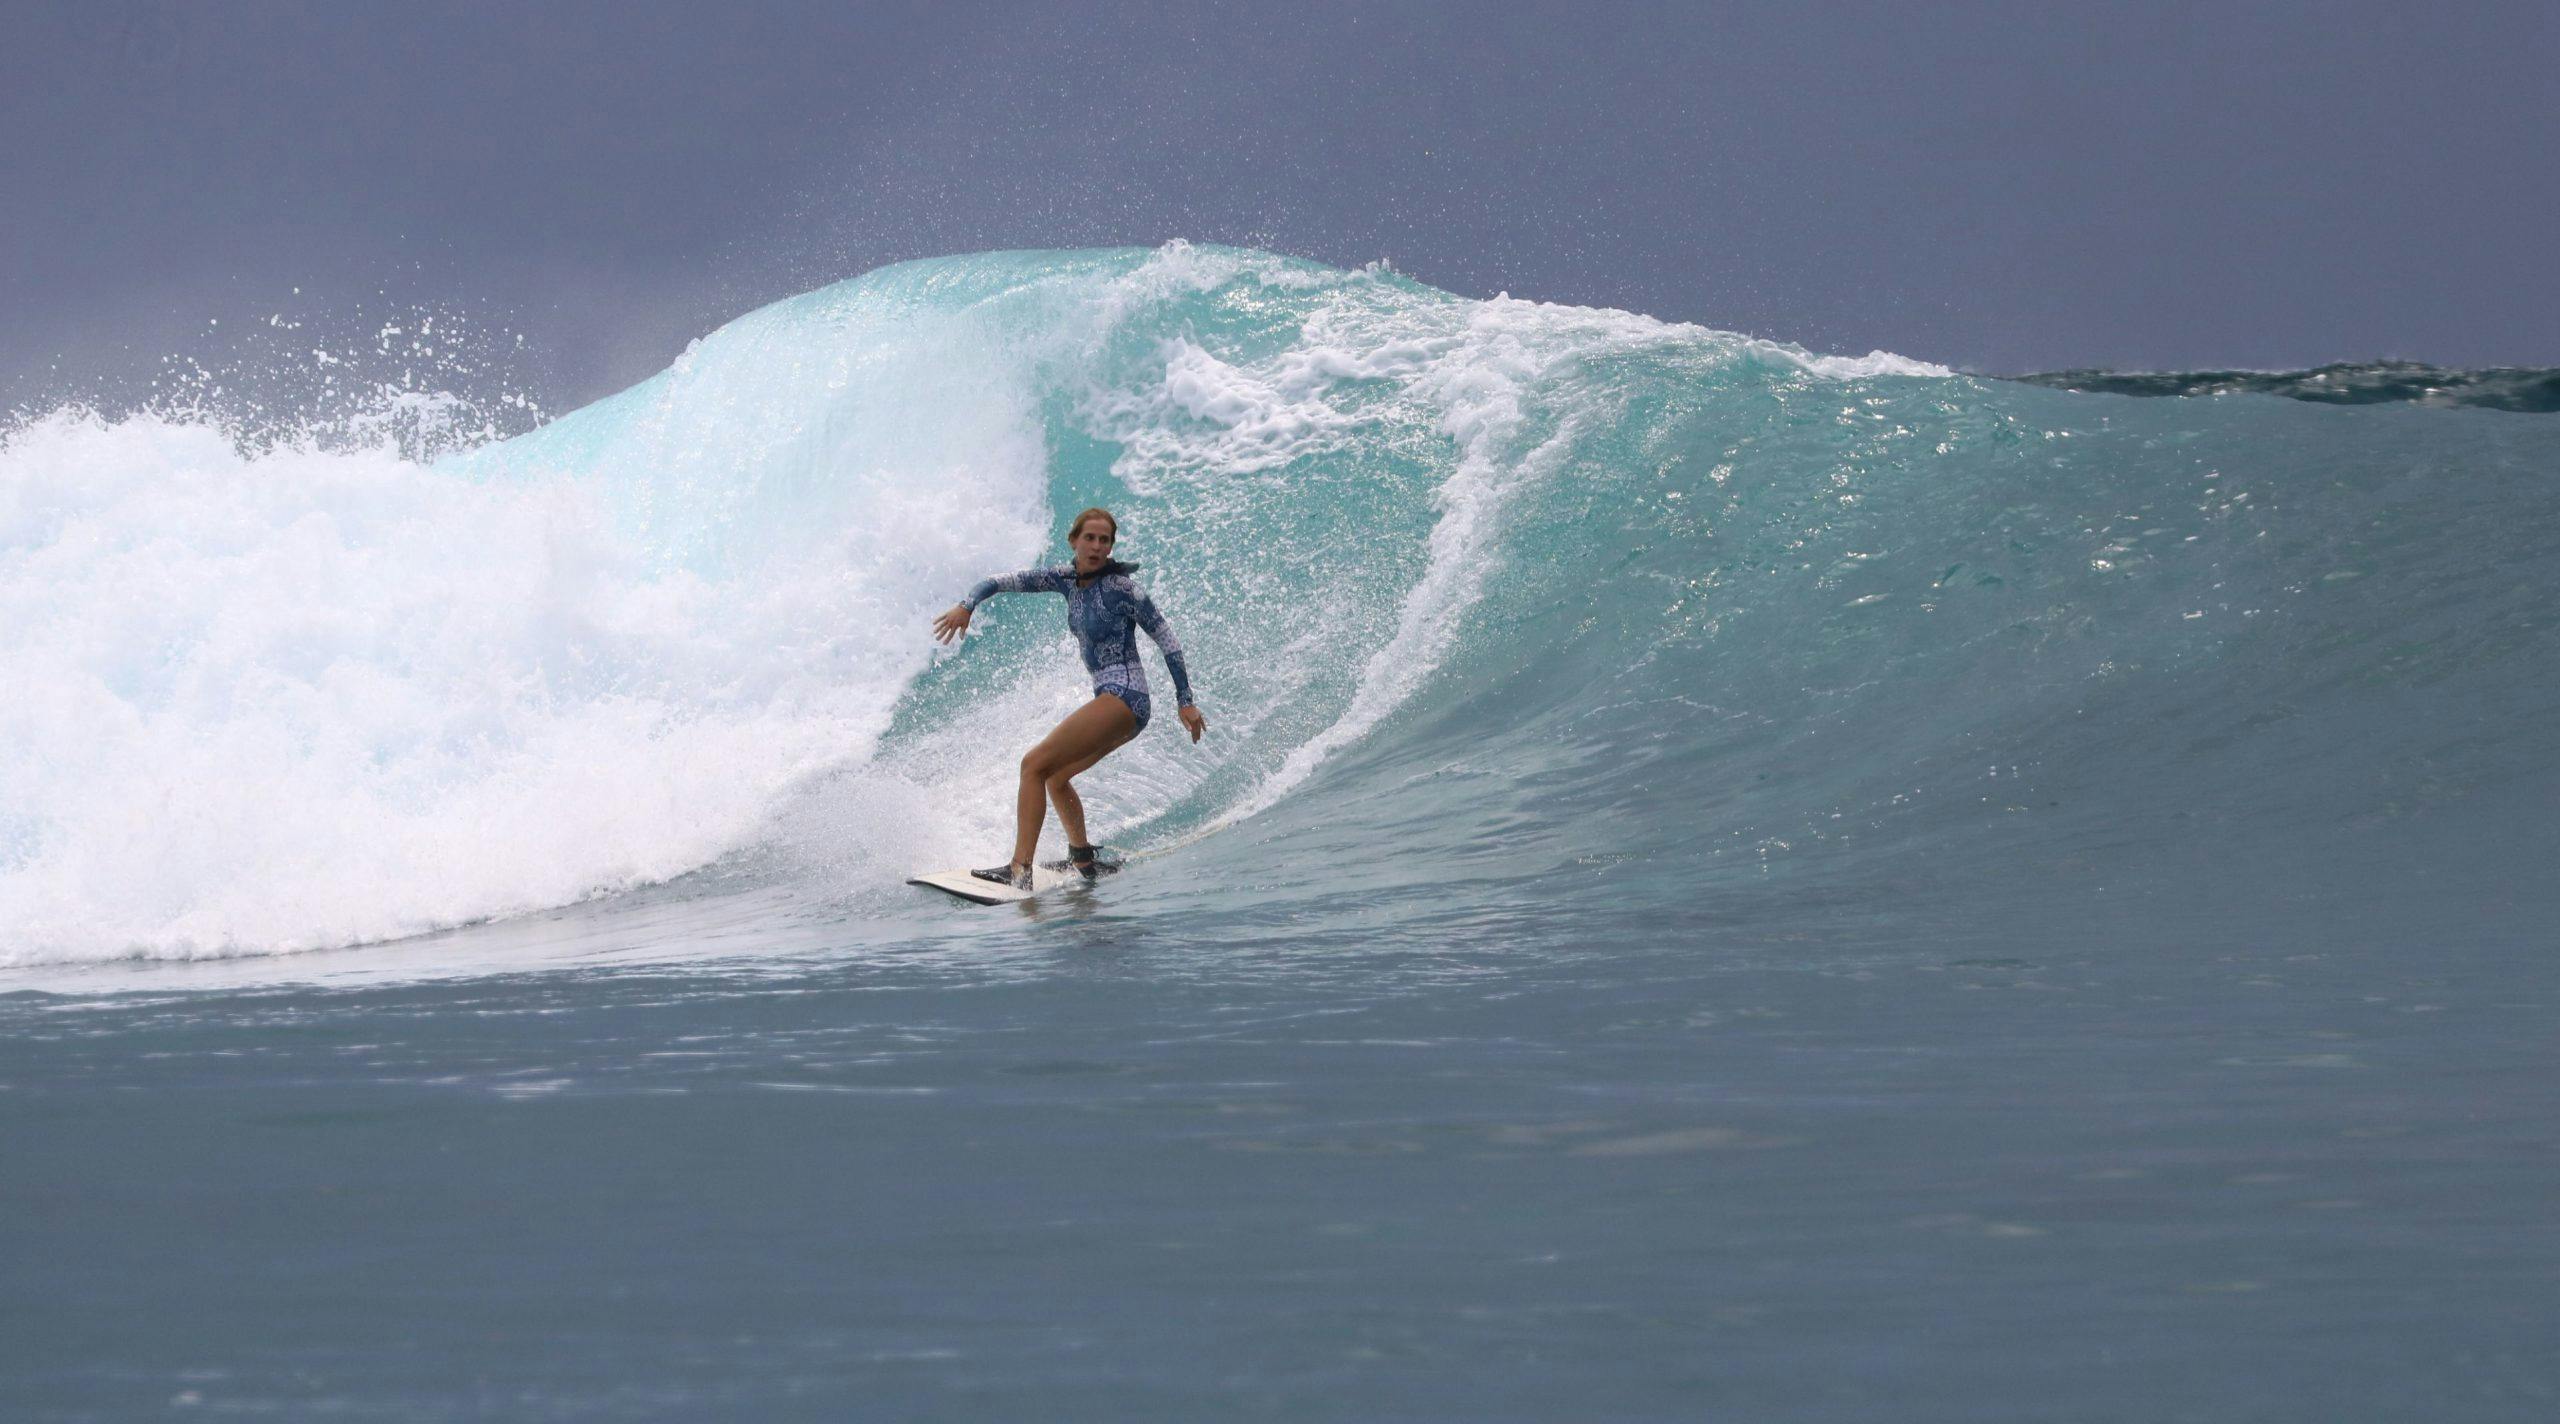 Ana Manero rides a surfboard while a wave breaks behind her.